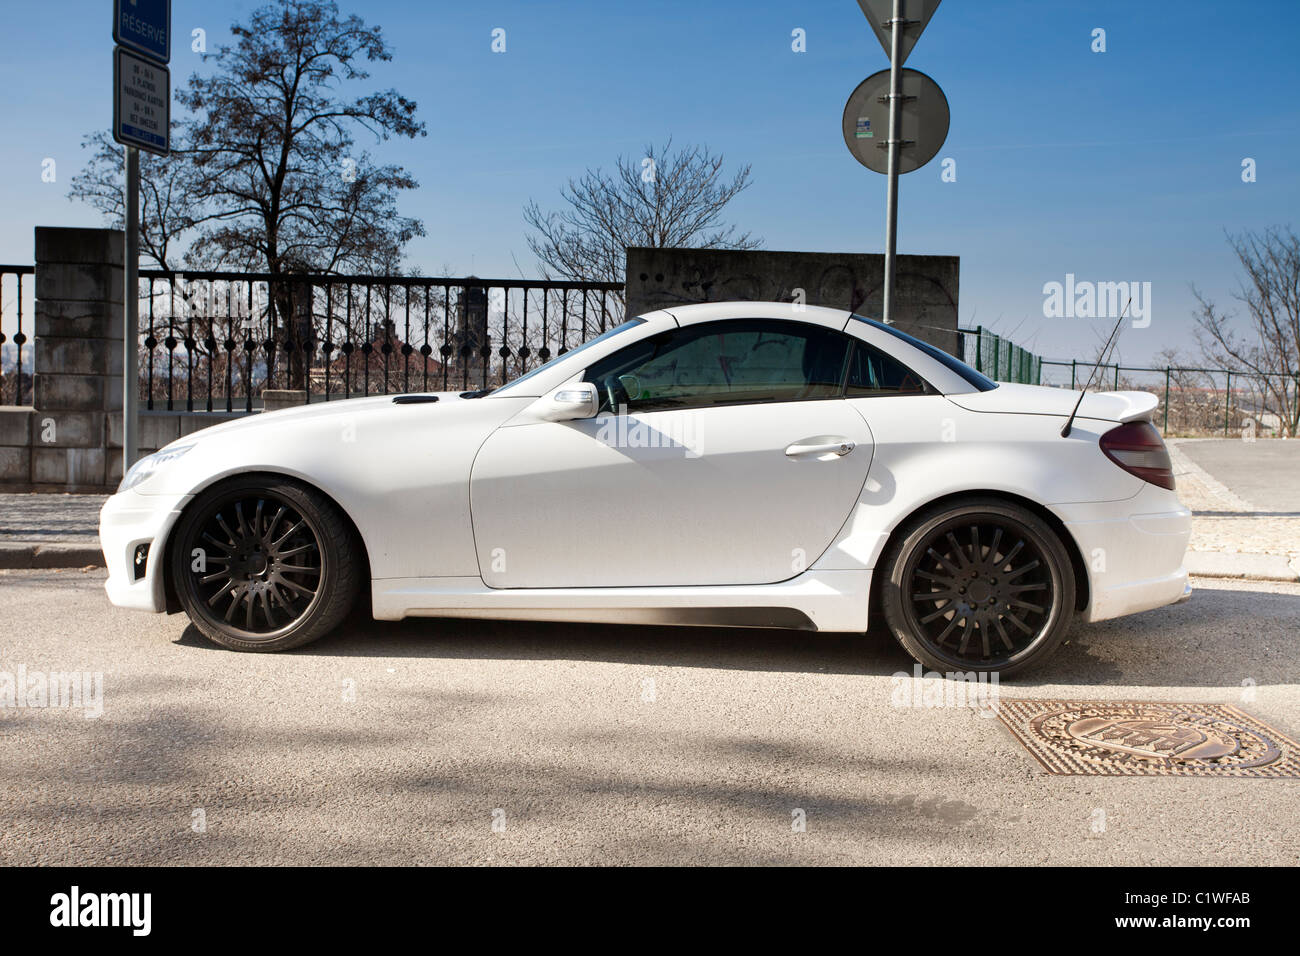 White Mercedes-Benz SLK sports car parked in the street Stock Photo